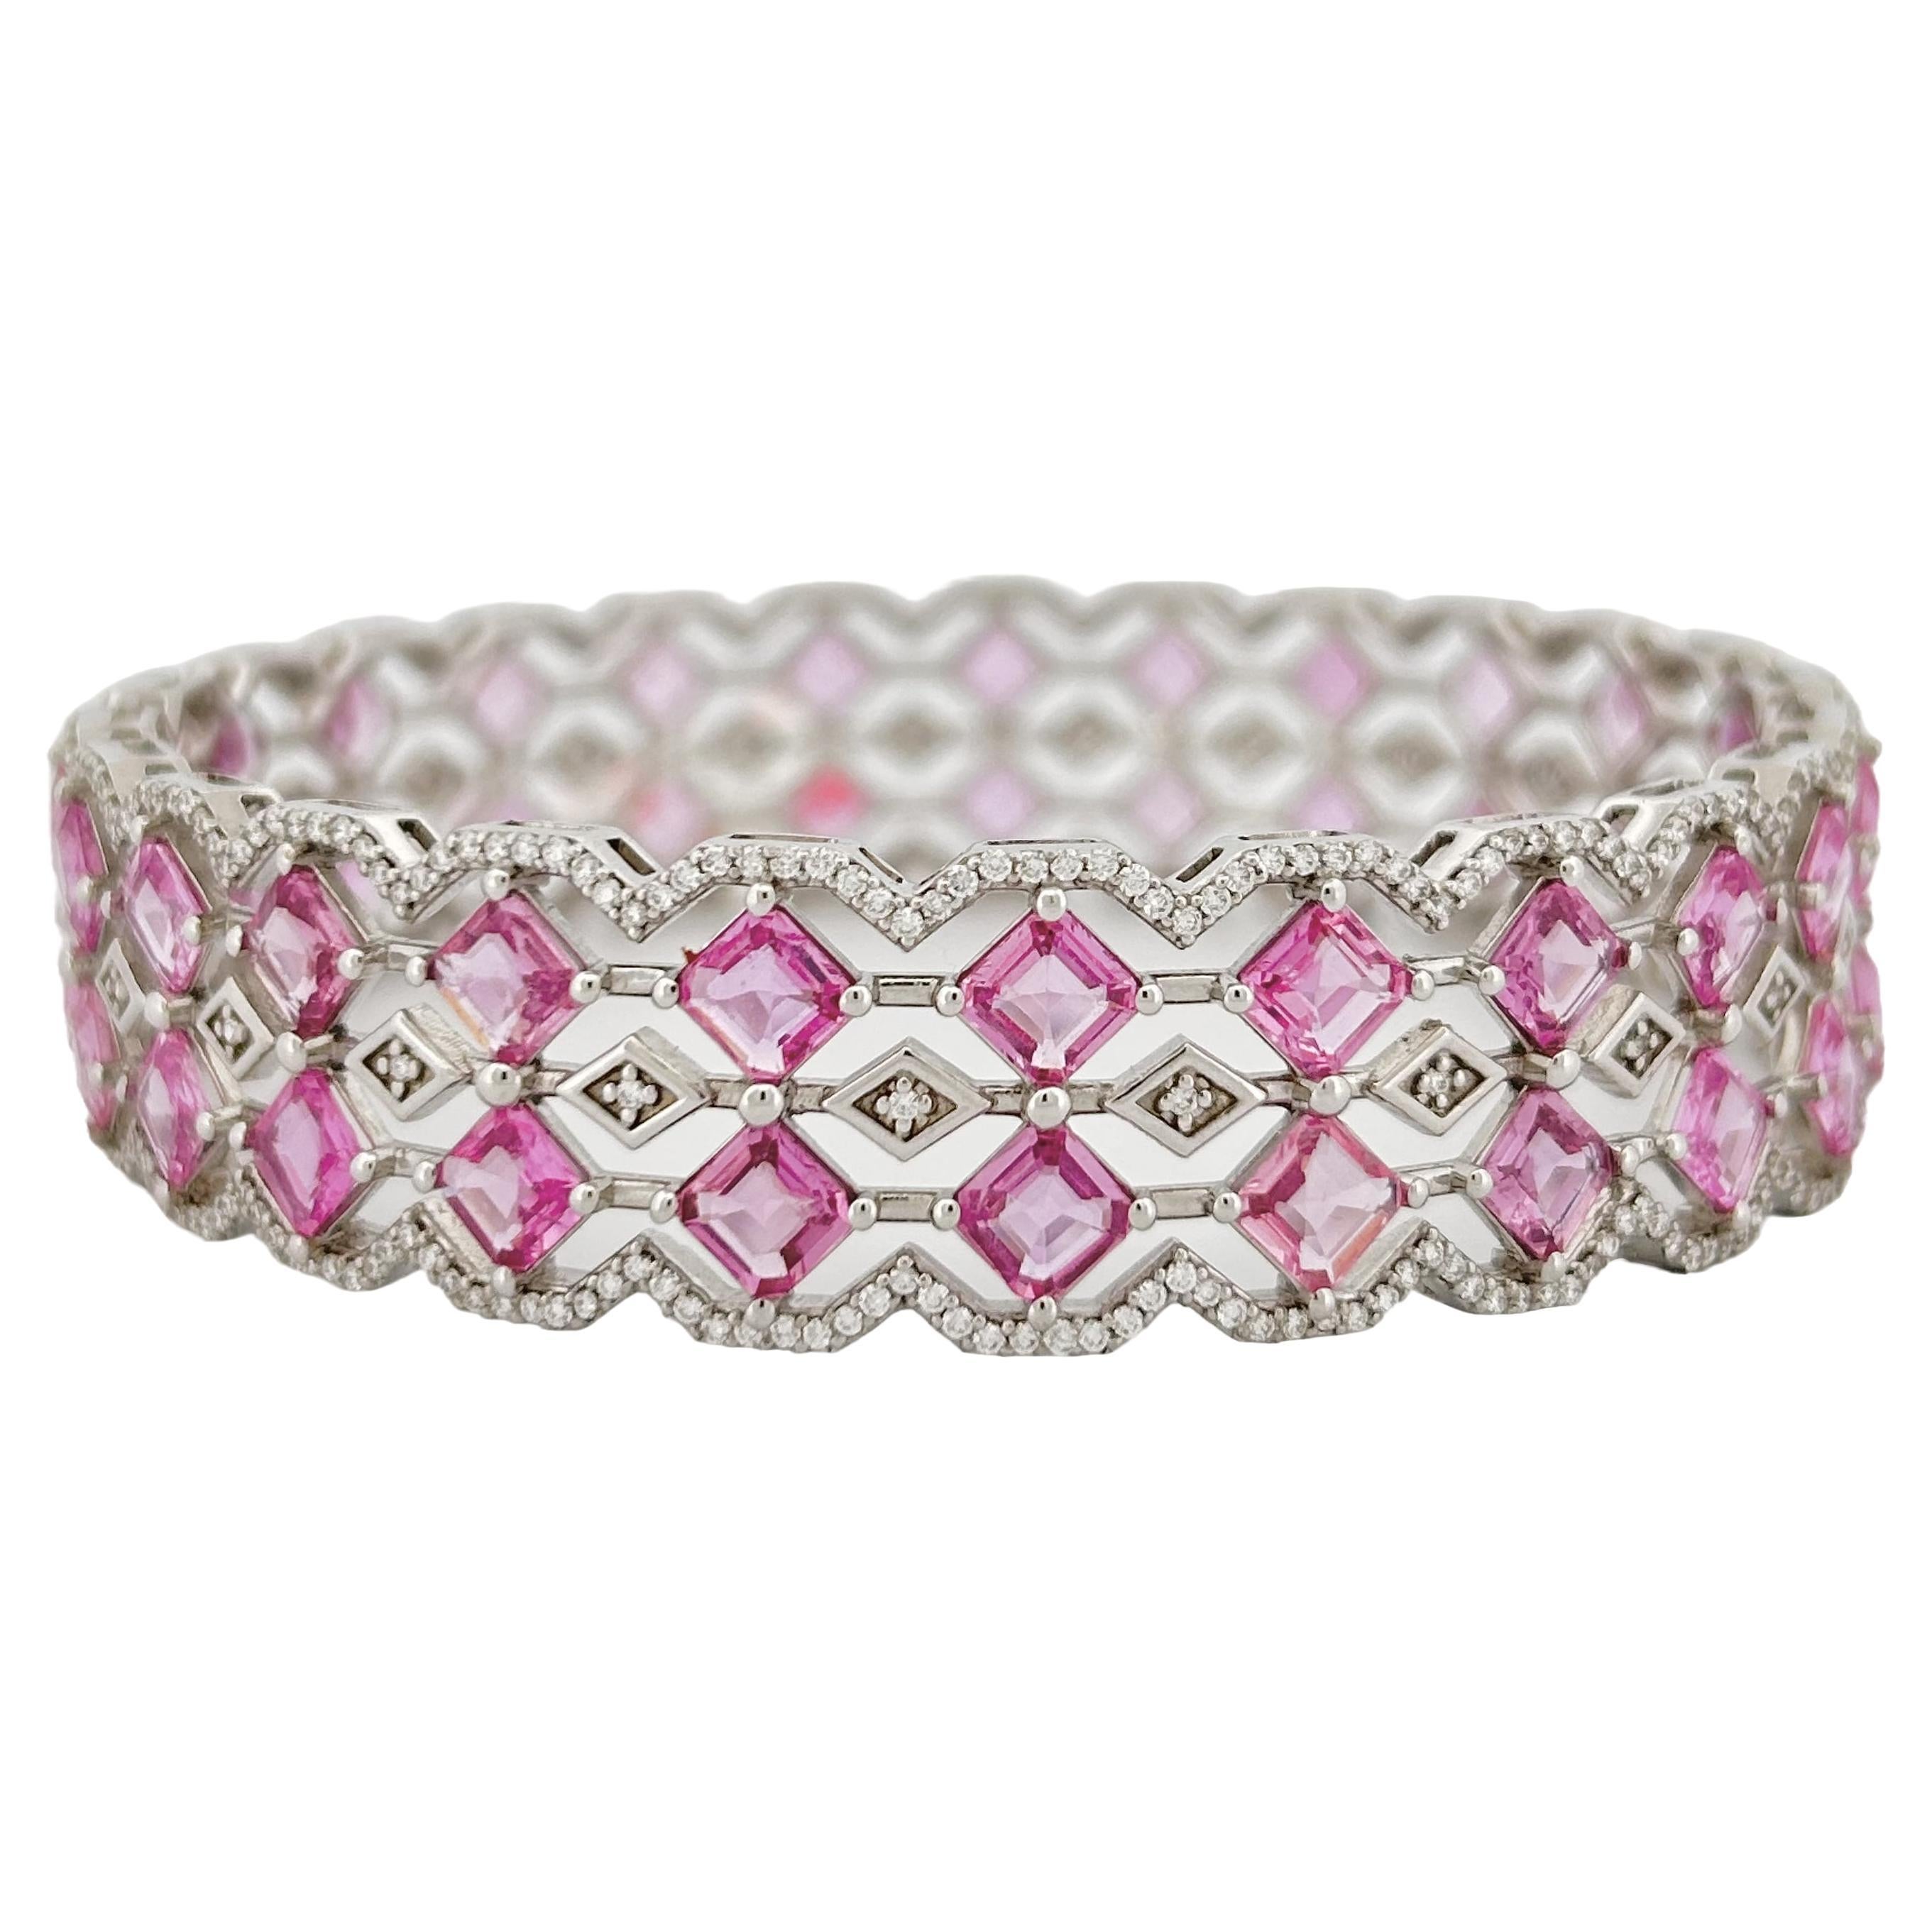 26.96 Ct Pink Sapphires & Diamonds Studded Statement Bangle in 18K White Gold